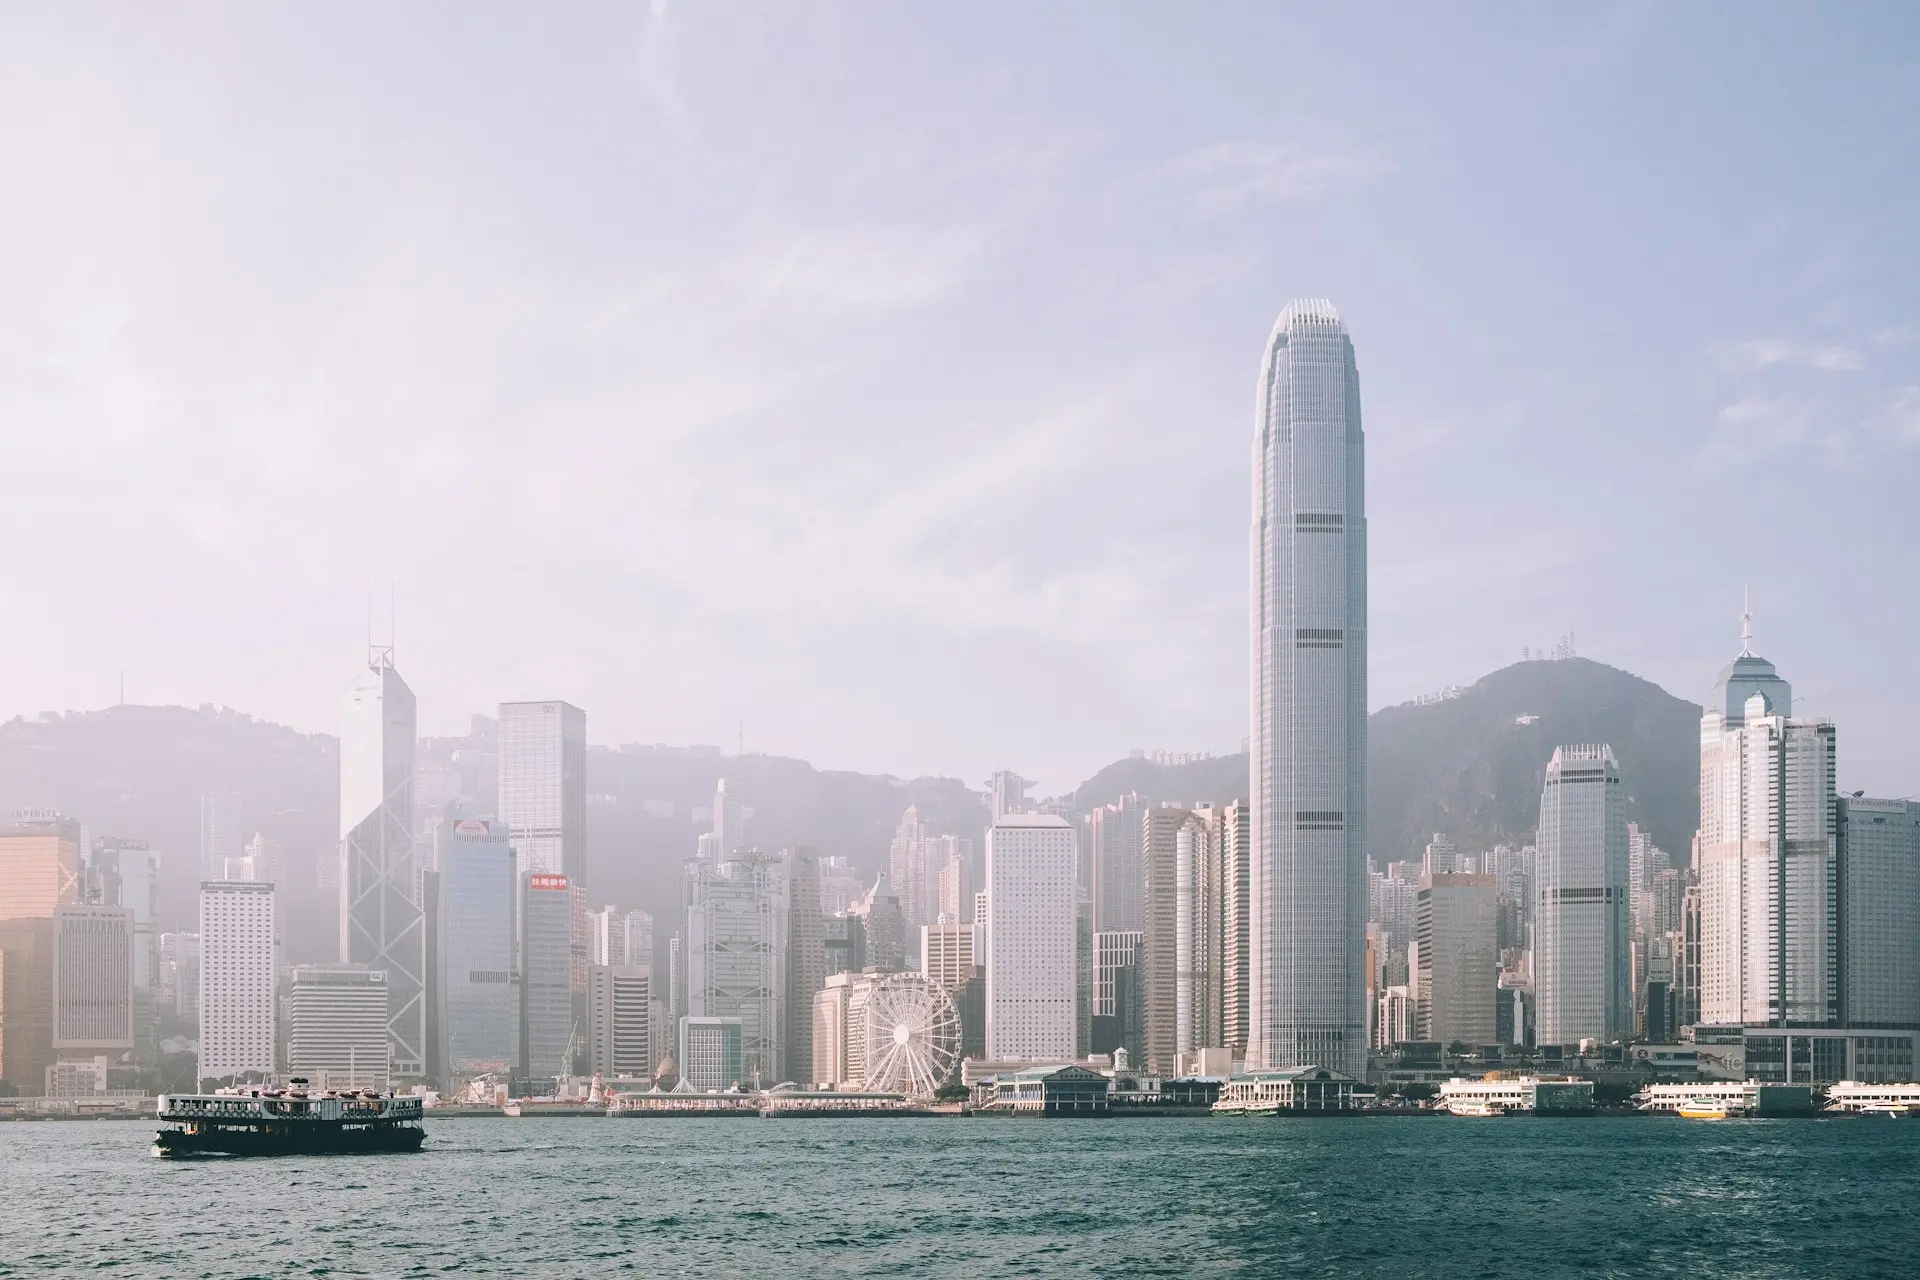 Taxation Of Cross-Border Mergers And Acquisitions: Hong Kong 2016